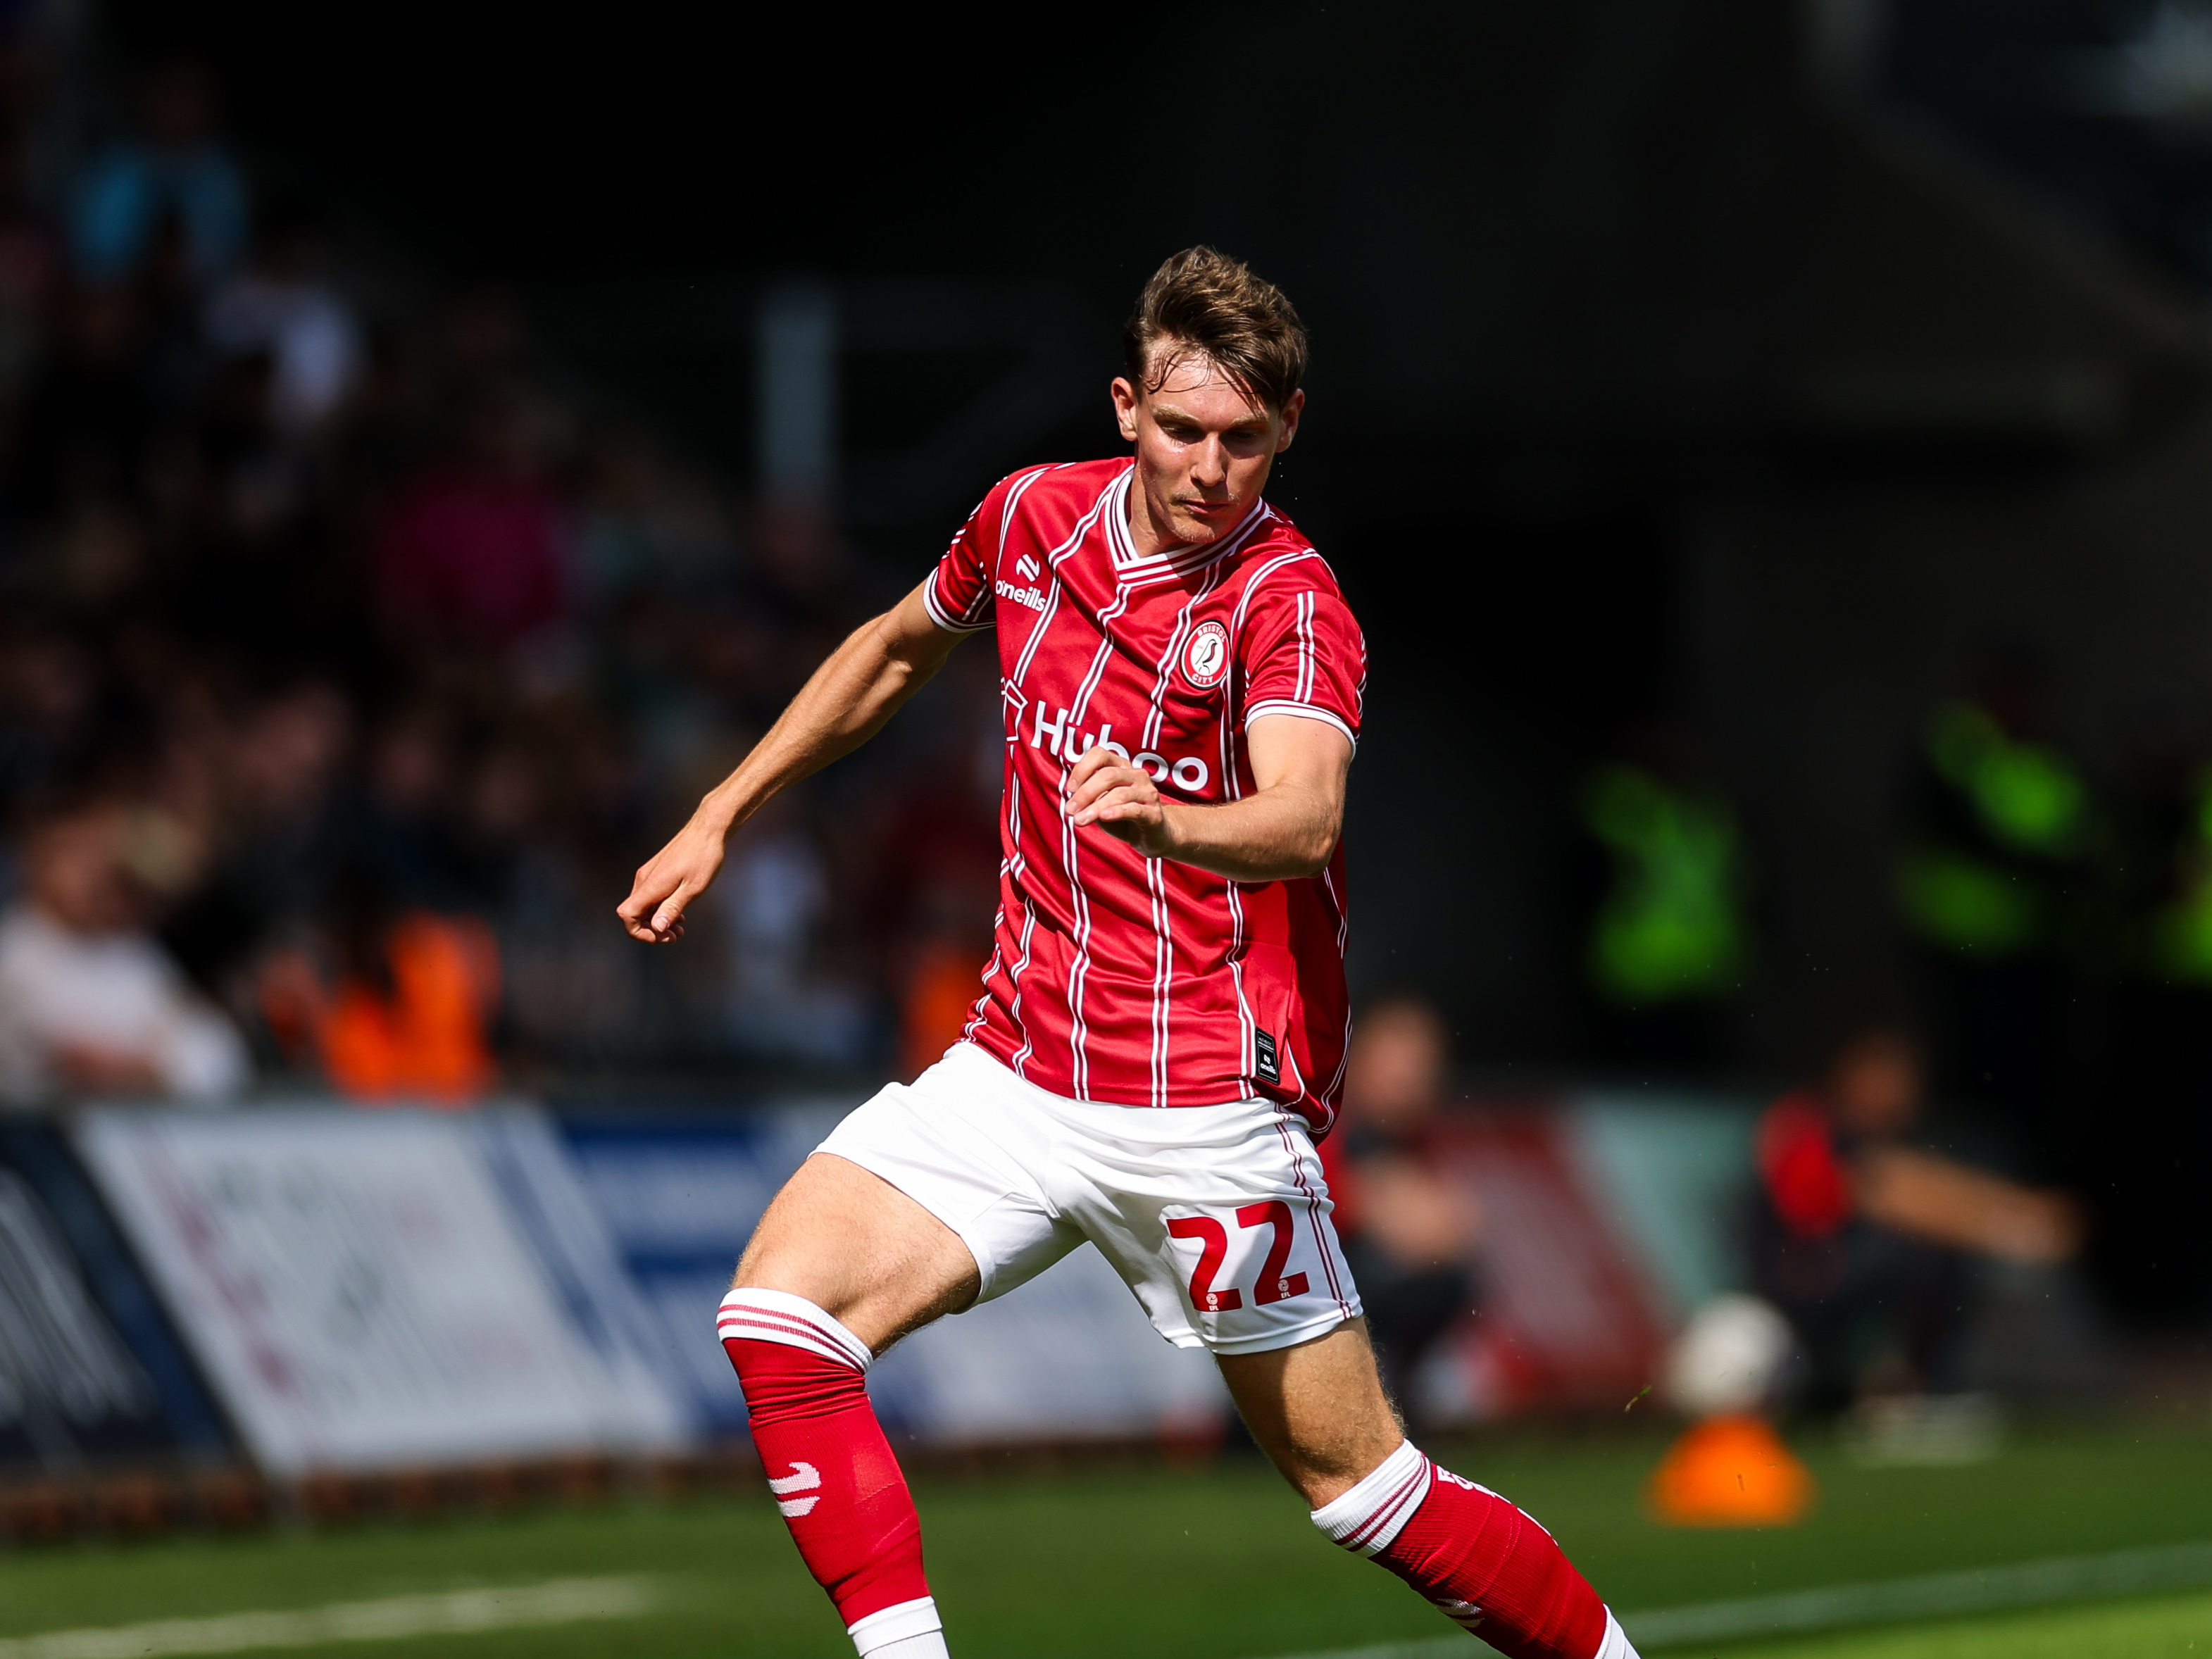 An image of Taylor Gardner-Hickman playing for Bristol City